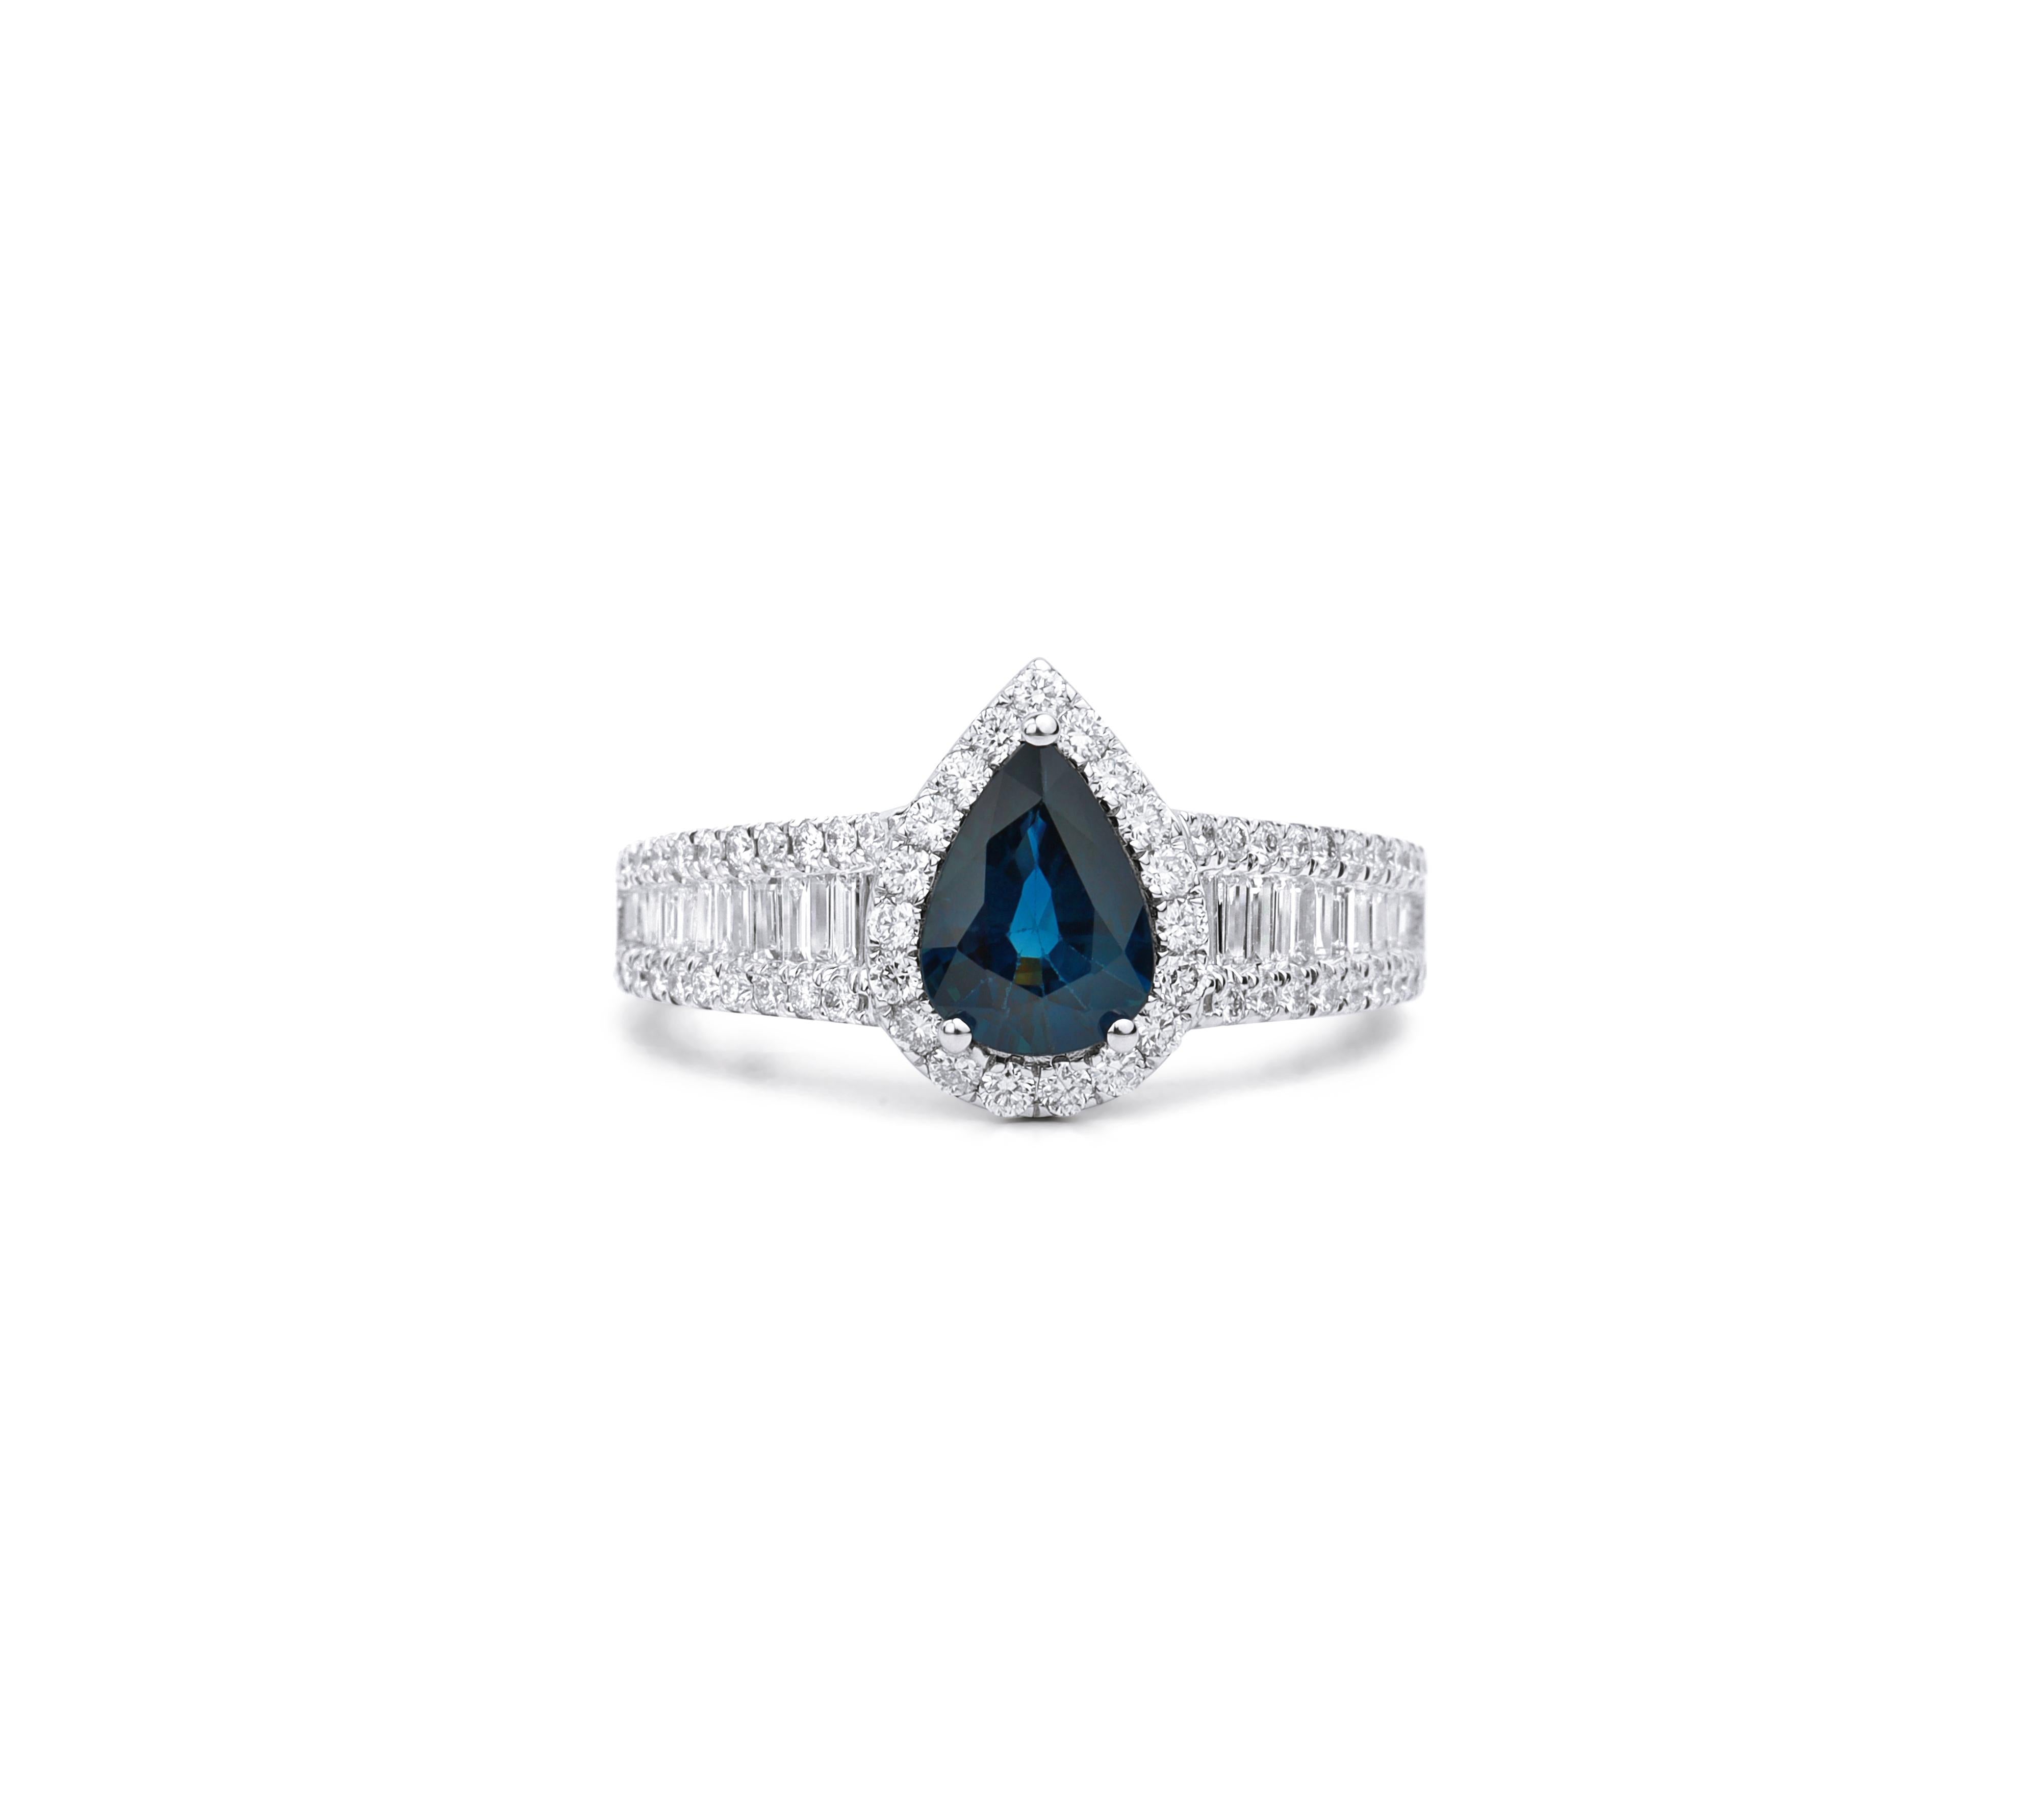 Pear Blue Sapphire Diamond Double Halo Cocktail Engagement Proposal Ring For Her

Available in 18k white gold.

Same design can be made also with other custom gemstones per request.

Product details:

- Solid gold

- Diamond - approx. 0.75 carat

-